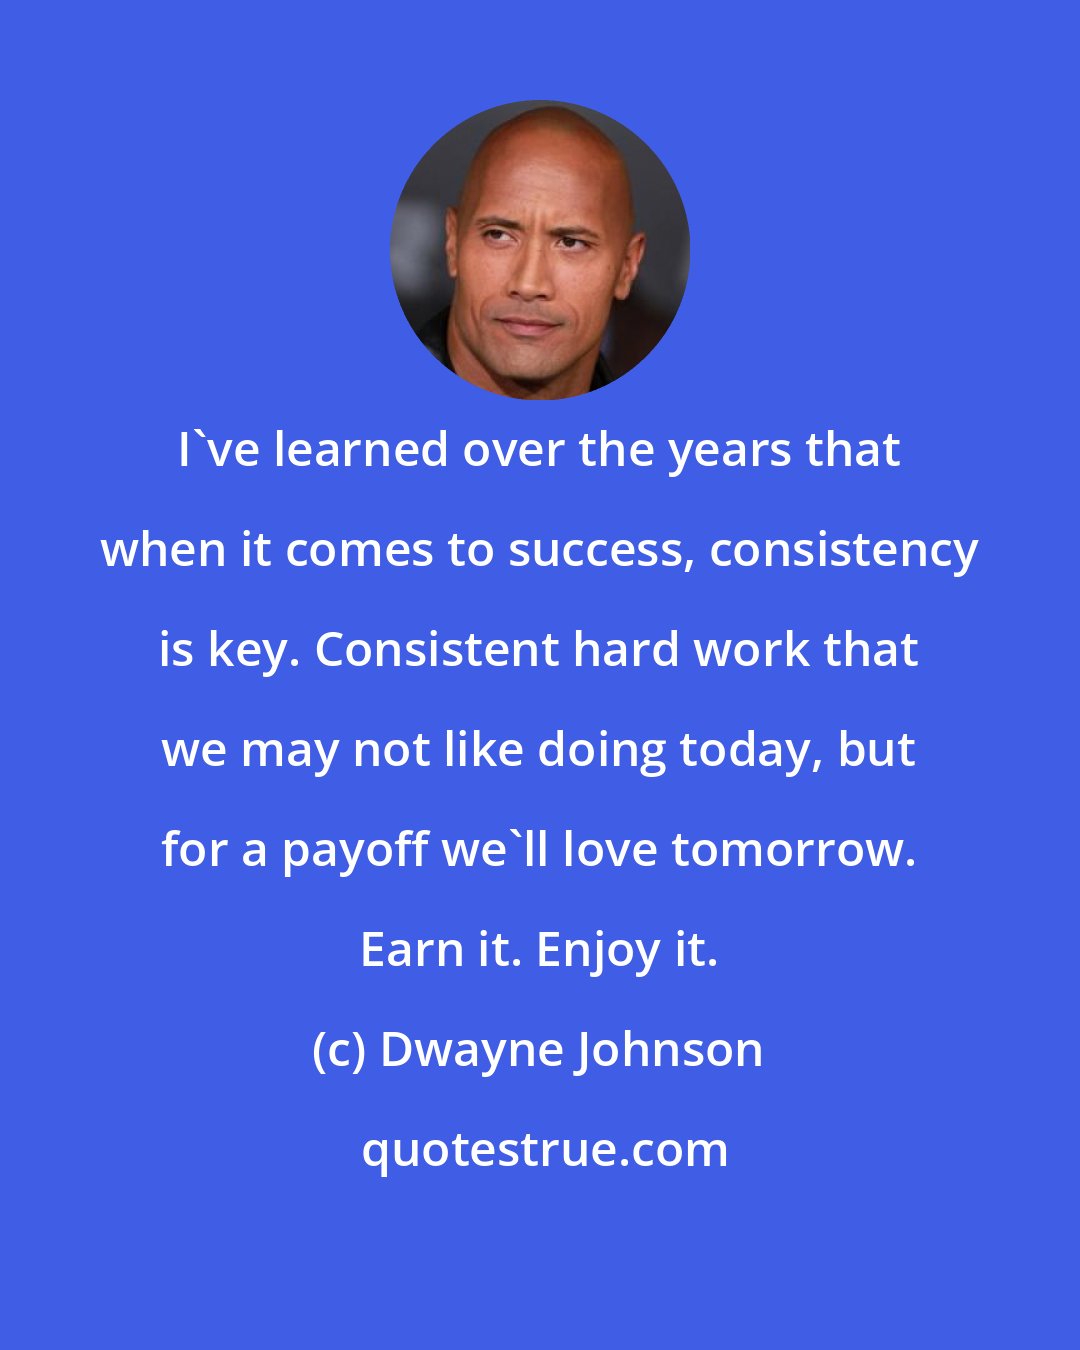 Dwayne Johnson: I've learned over the years that when it comes to success, consistency is key. Consistent hard work that we may not like doing today, but for a payoff we'll love tomorrow. Earn it. Enjoy it.